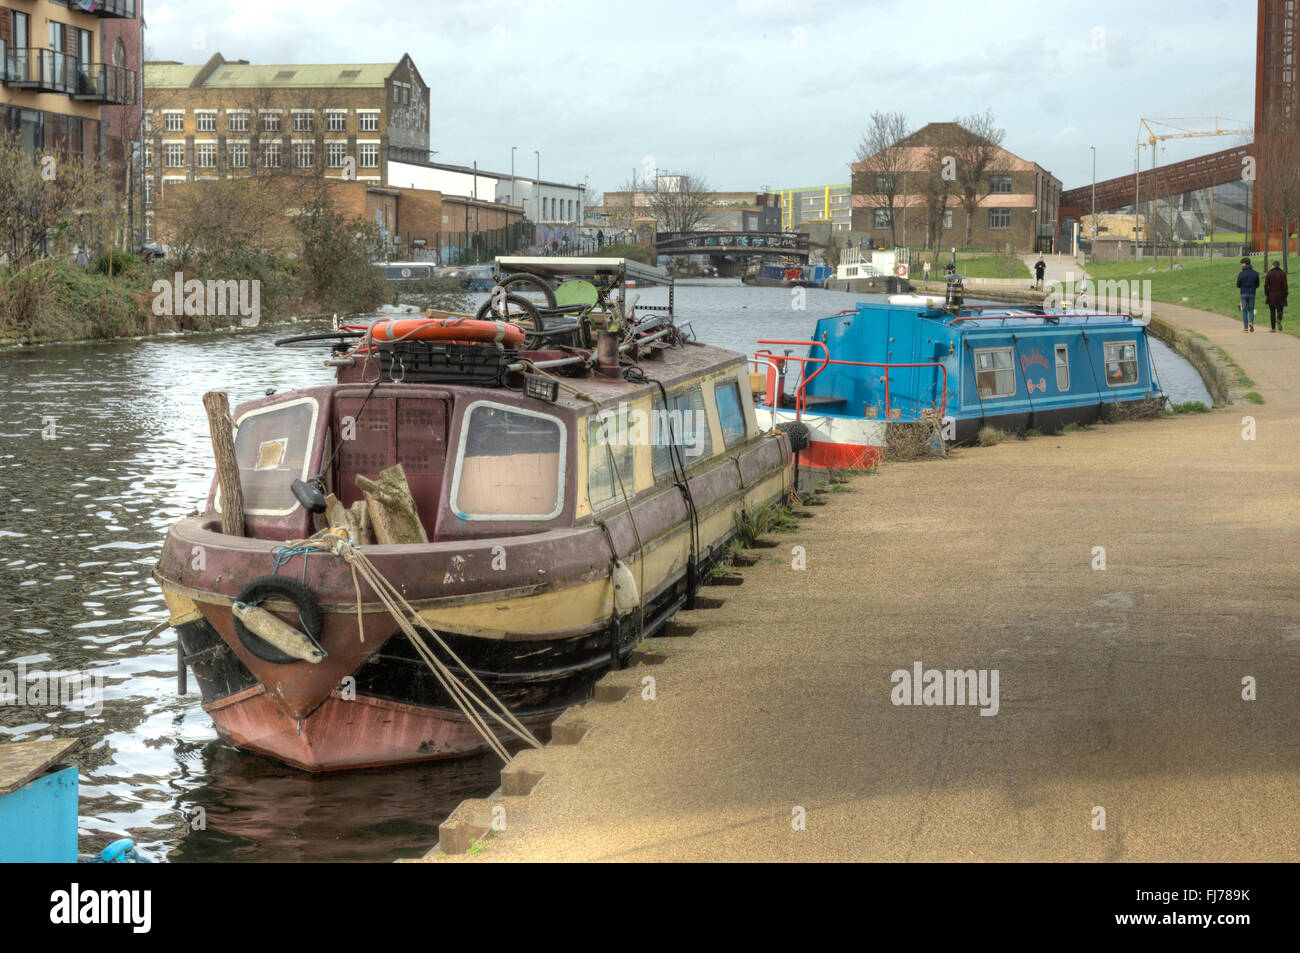 Lee navigation canal boat, canal vivere, houseboat Foto Stock